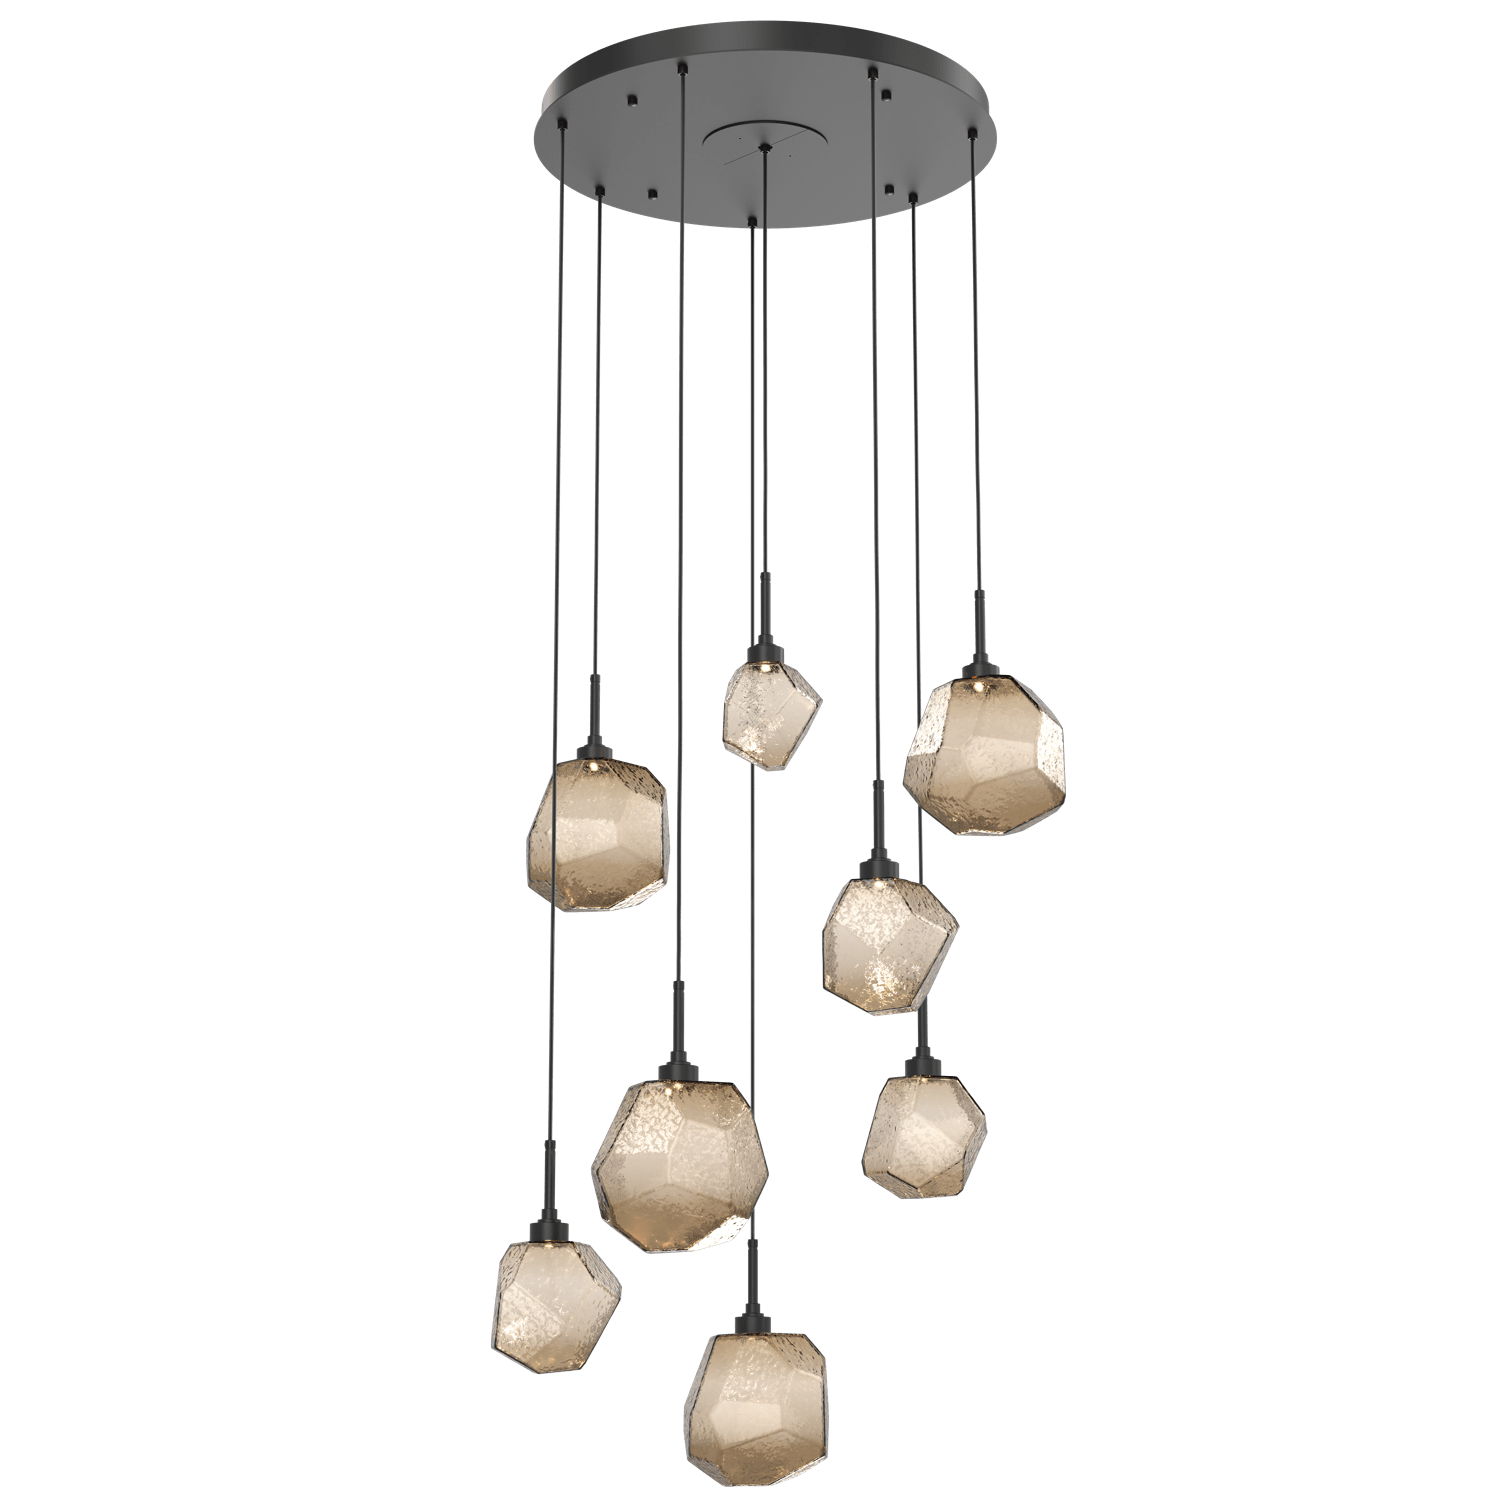 CHB0039-08-MB-B-Hammerton-Studio-Gem-8-light-round-pendant-chandelier-with-matte-black-finish-and-bronze-blown-glass-shades-and-LED-lamping